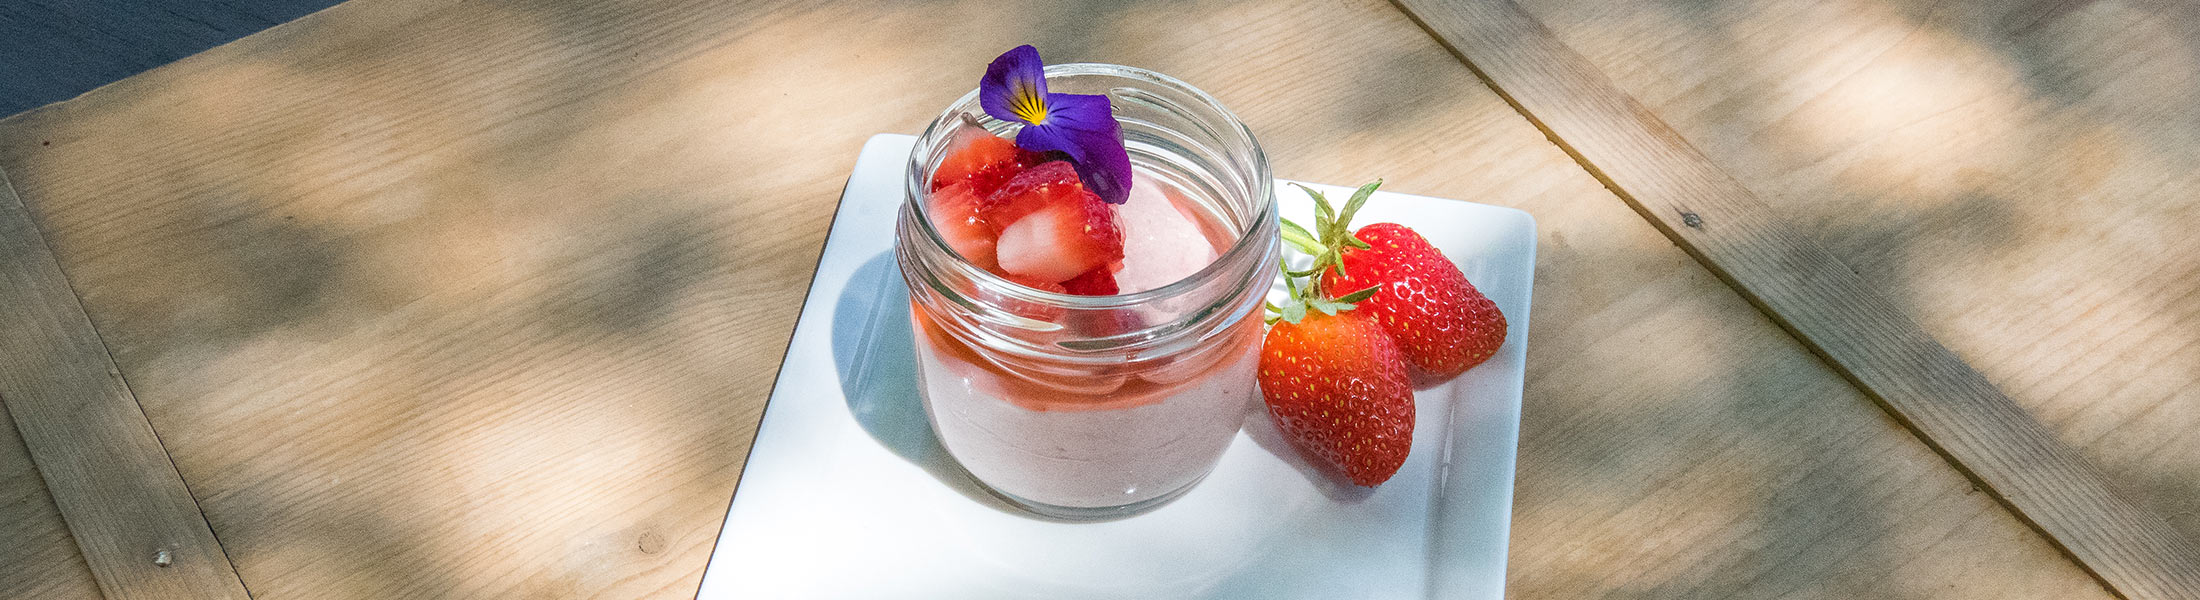 Rodney Strong - Rhubarb Mousse with Macerated Strawberries